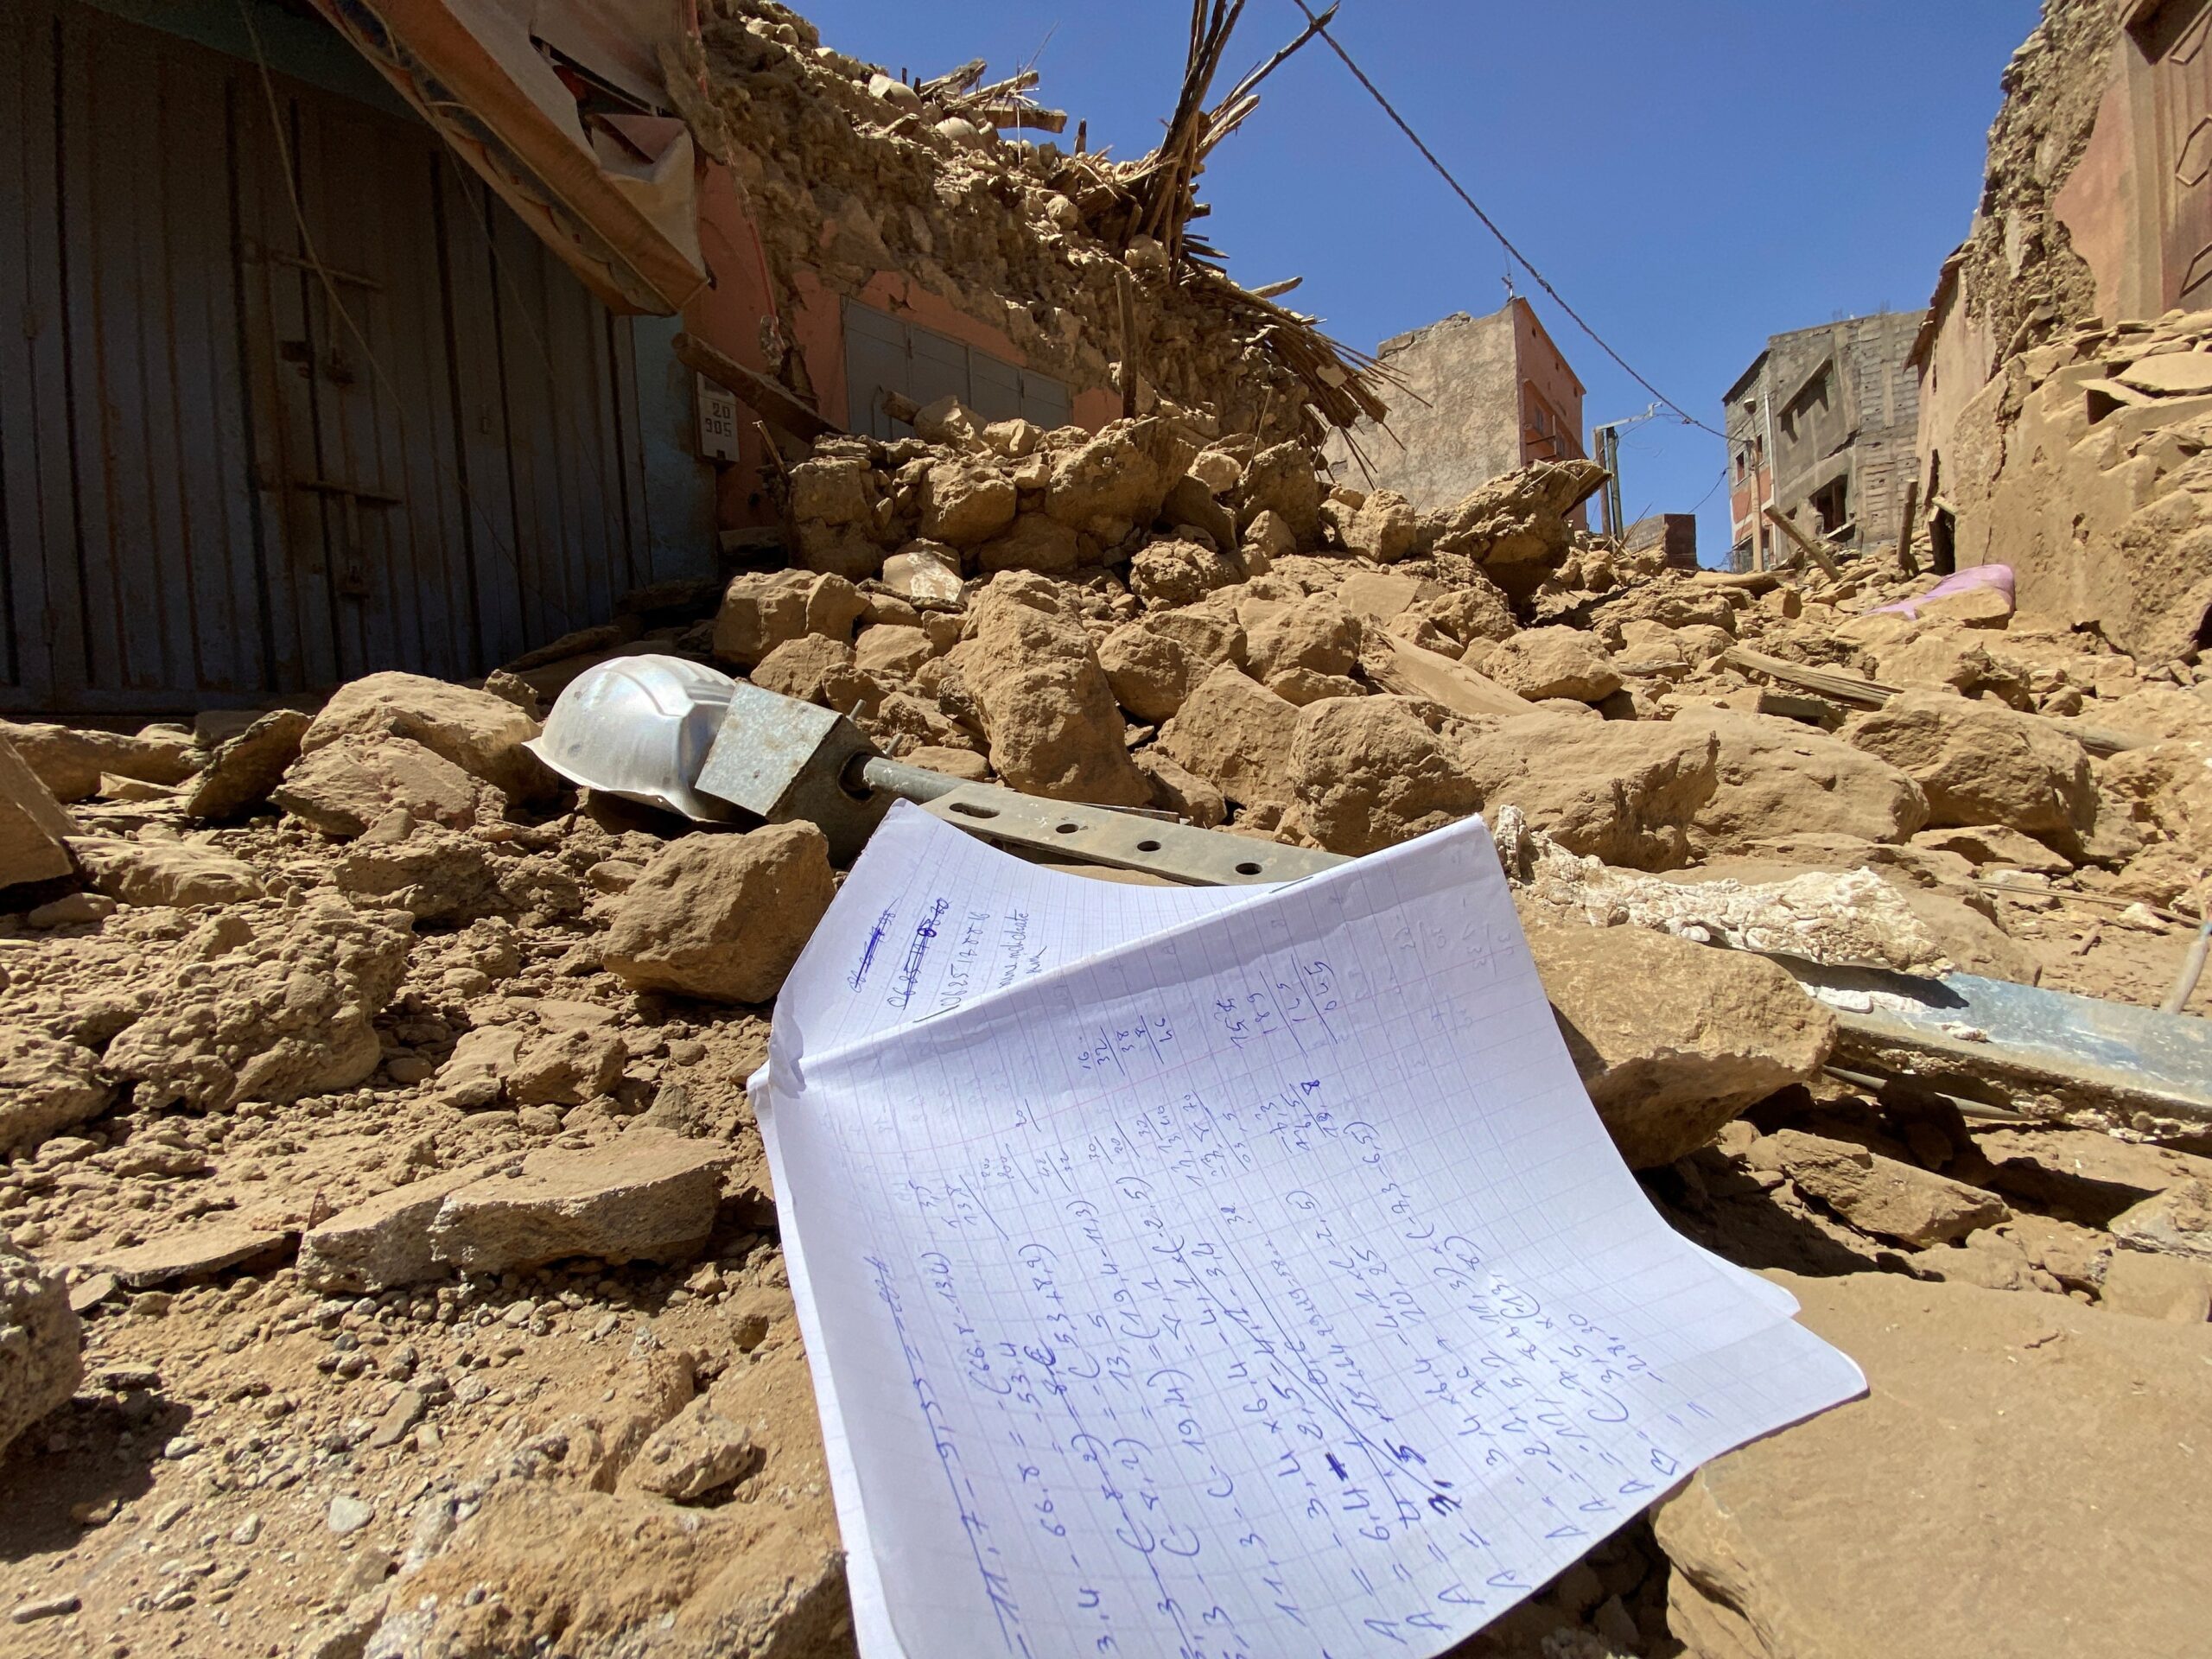 A notebook is seen Sept. 9, 2023, amid the rubble in Amizmiz, Morocco, in the aftermath of the deadliest earthquake to hit the country in decades, killing at least 2,000 people. The U.S. Geological Survey recorded a magnitude 6.8 quake at 11:11 p.m. (local time) Sept. 8, while Morocco's seismic monitoring agency measured it at magnitude 7. (OSV News photo/Abdelhak Balhaki, Reuters)